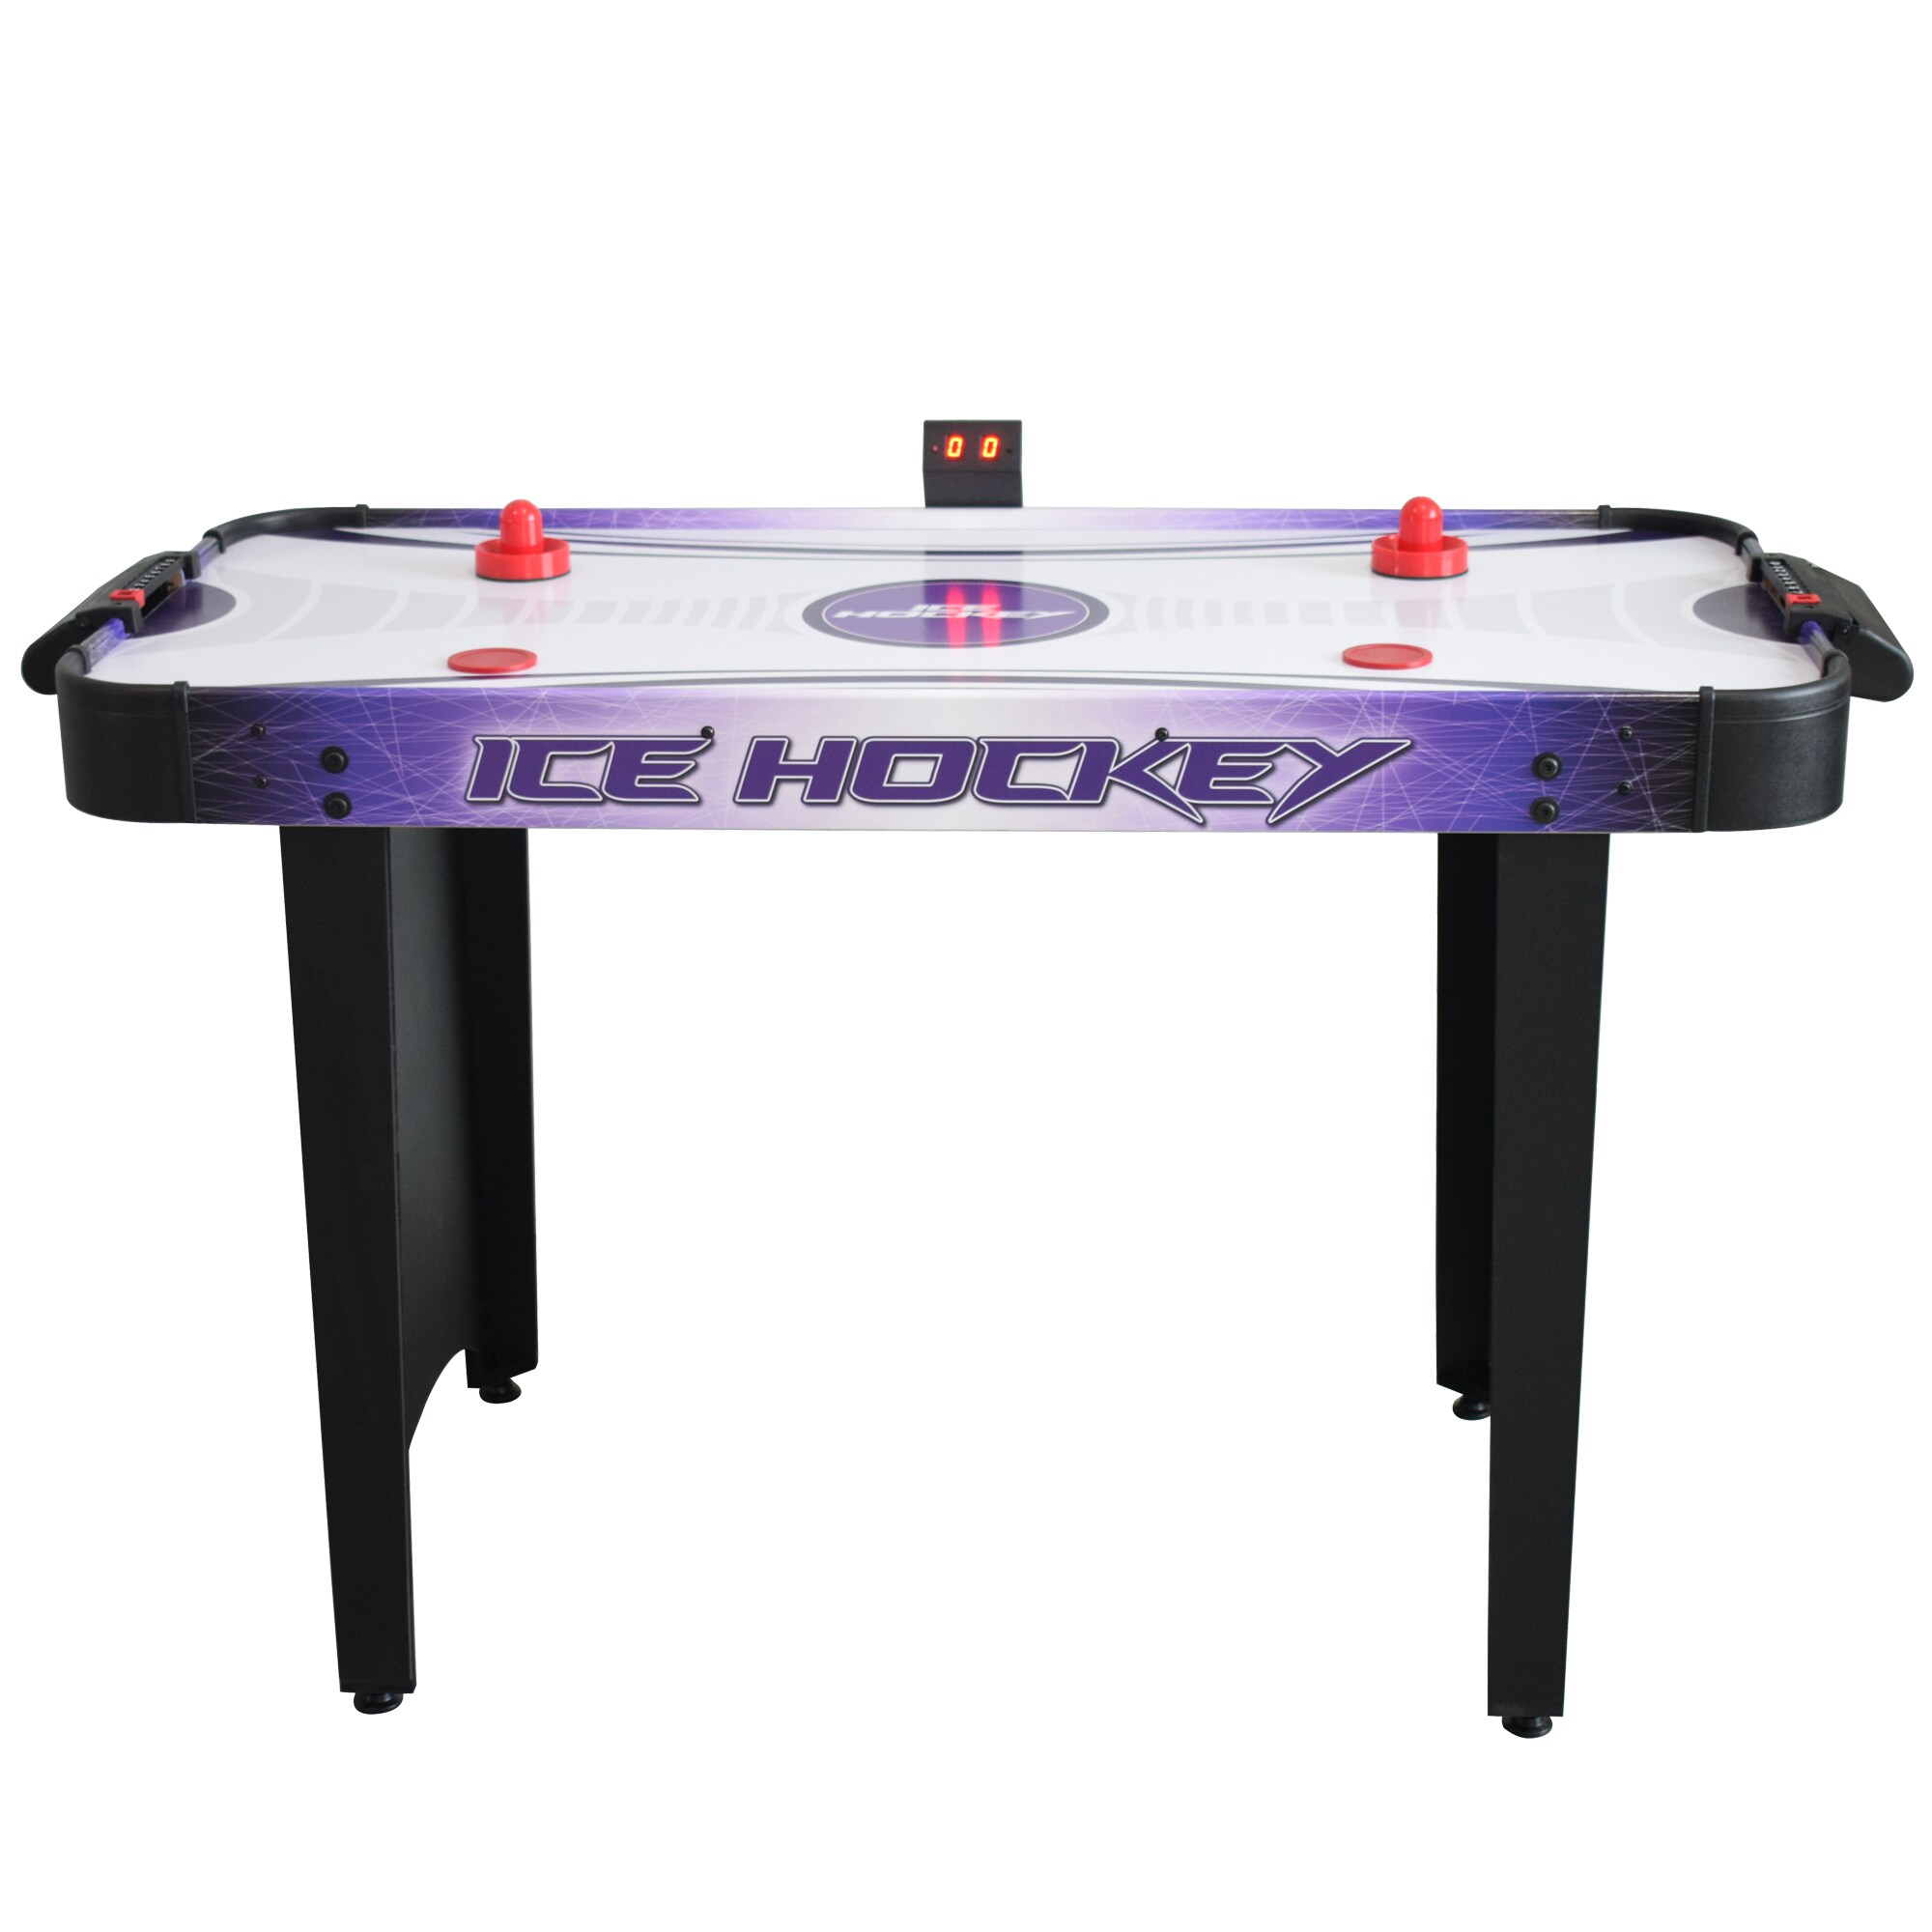 Plug-in Air Powered Hockey Set with Electric Scorer Indoor Arcade Game for Adult Game Room Includes 2 Pushers 2 Pucks and Leg Levelers for Family Game Night Sunnydaze 7 ft Air Hockey Table 